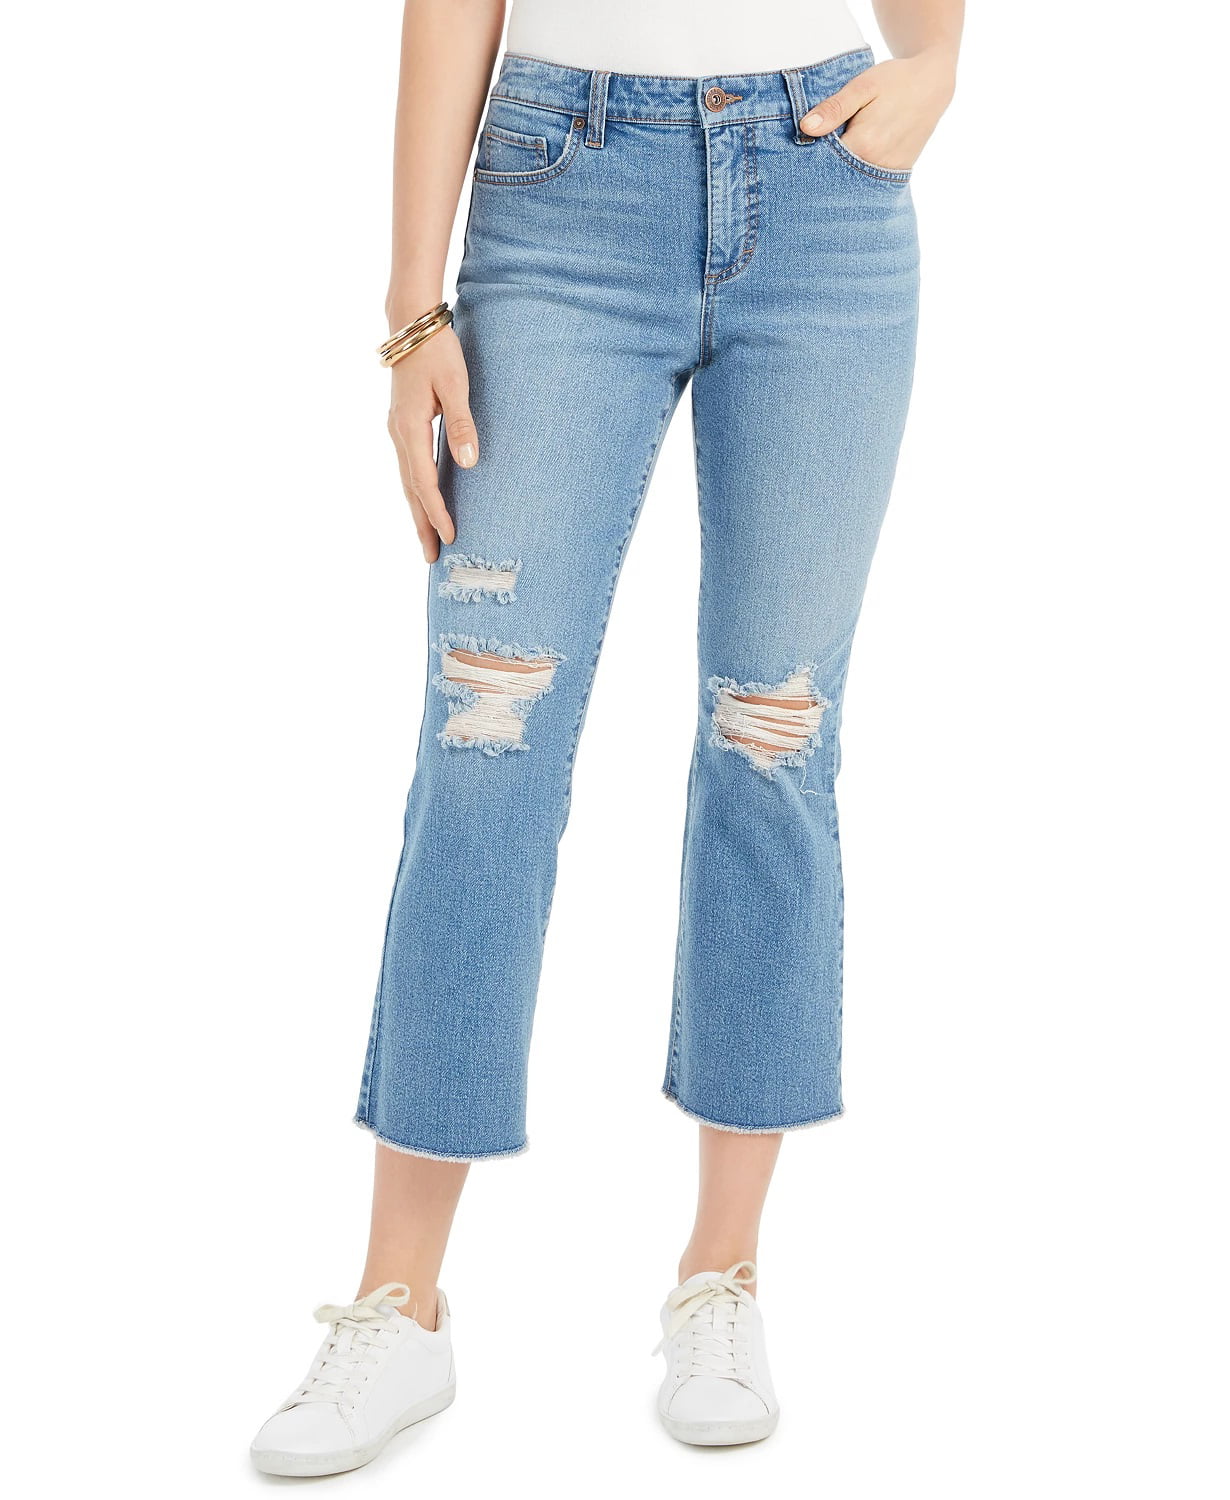 Style & Co Women's Ripped Authentic Cropped Kick-Flare Jeans Blue Size 8 -  